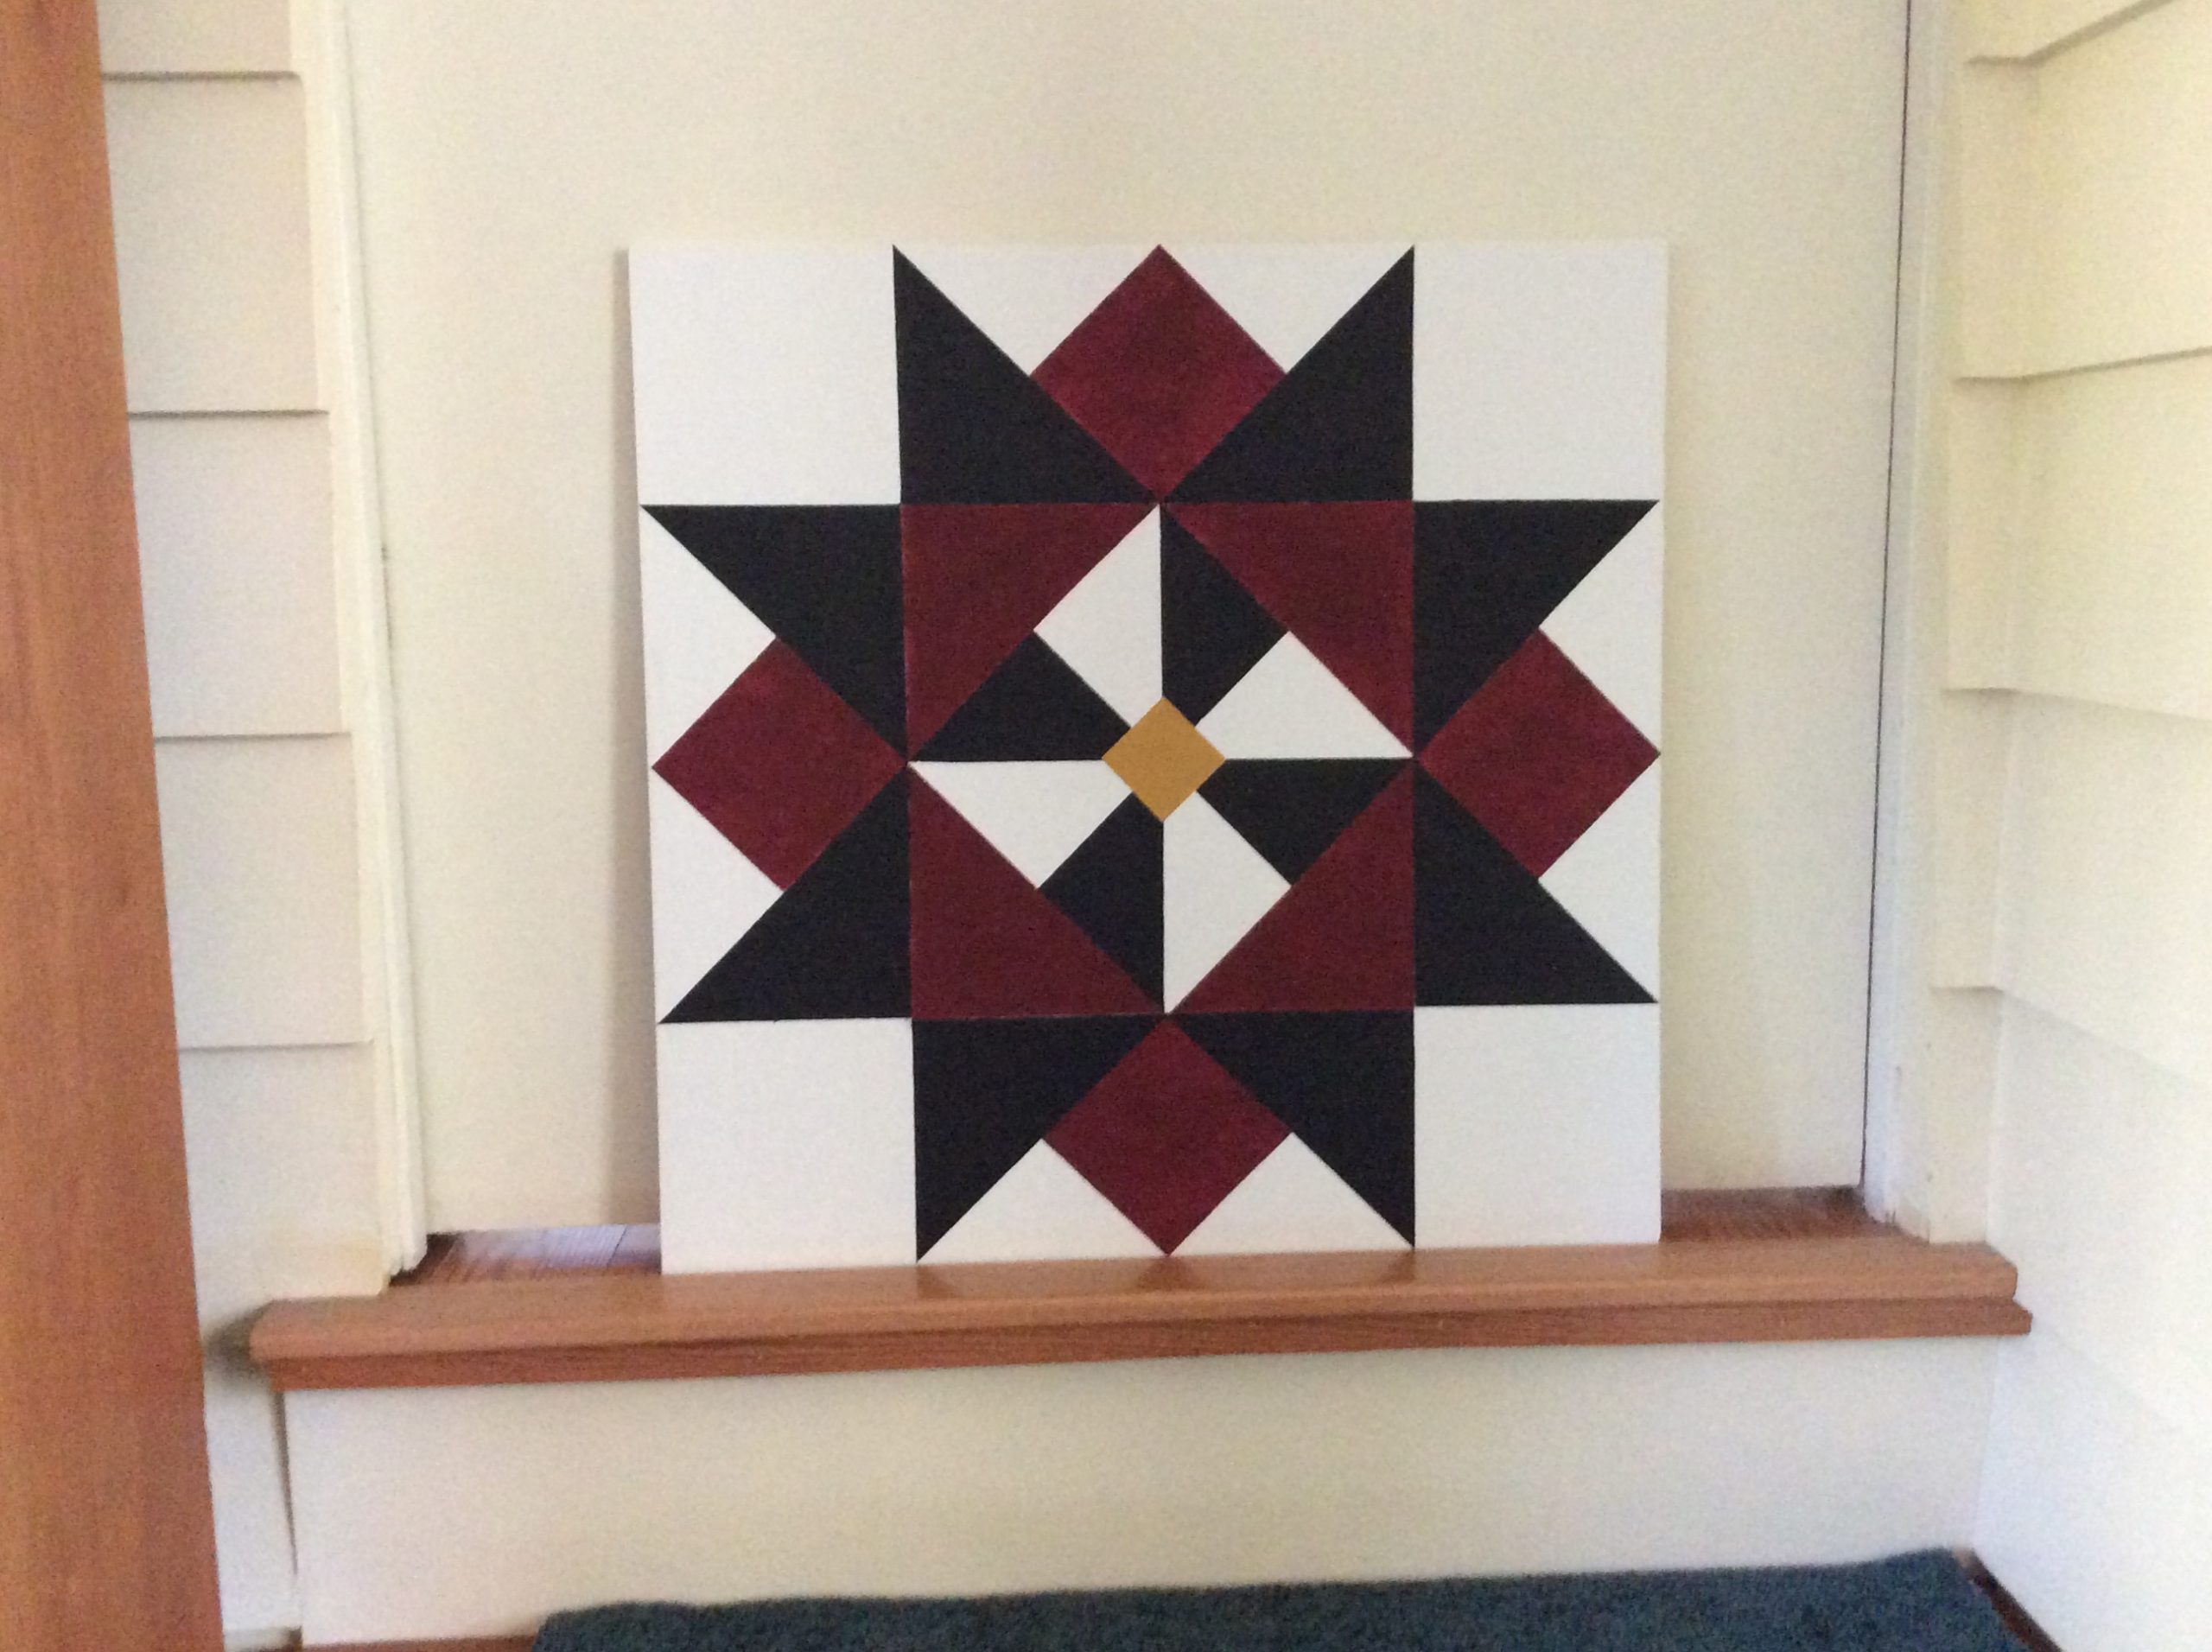 A geometric design on a barn quilt square made up of red, black and yellow triangles.